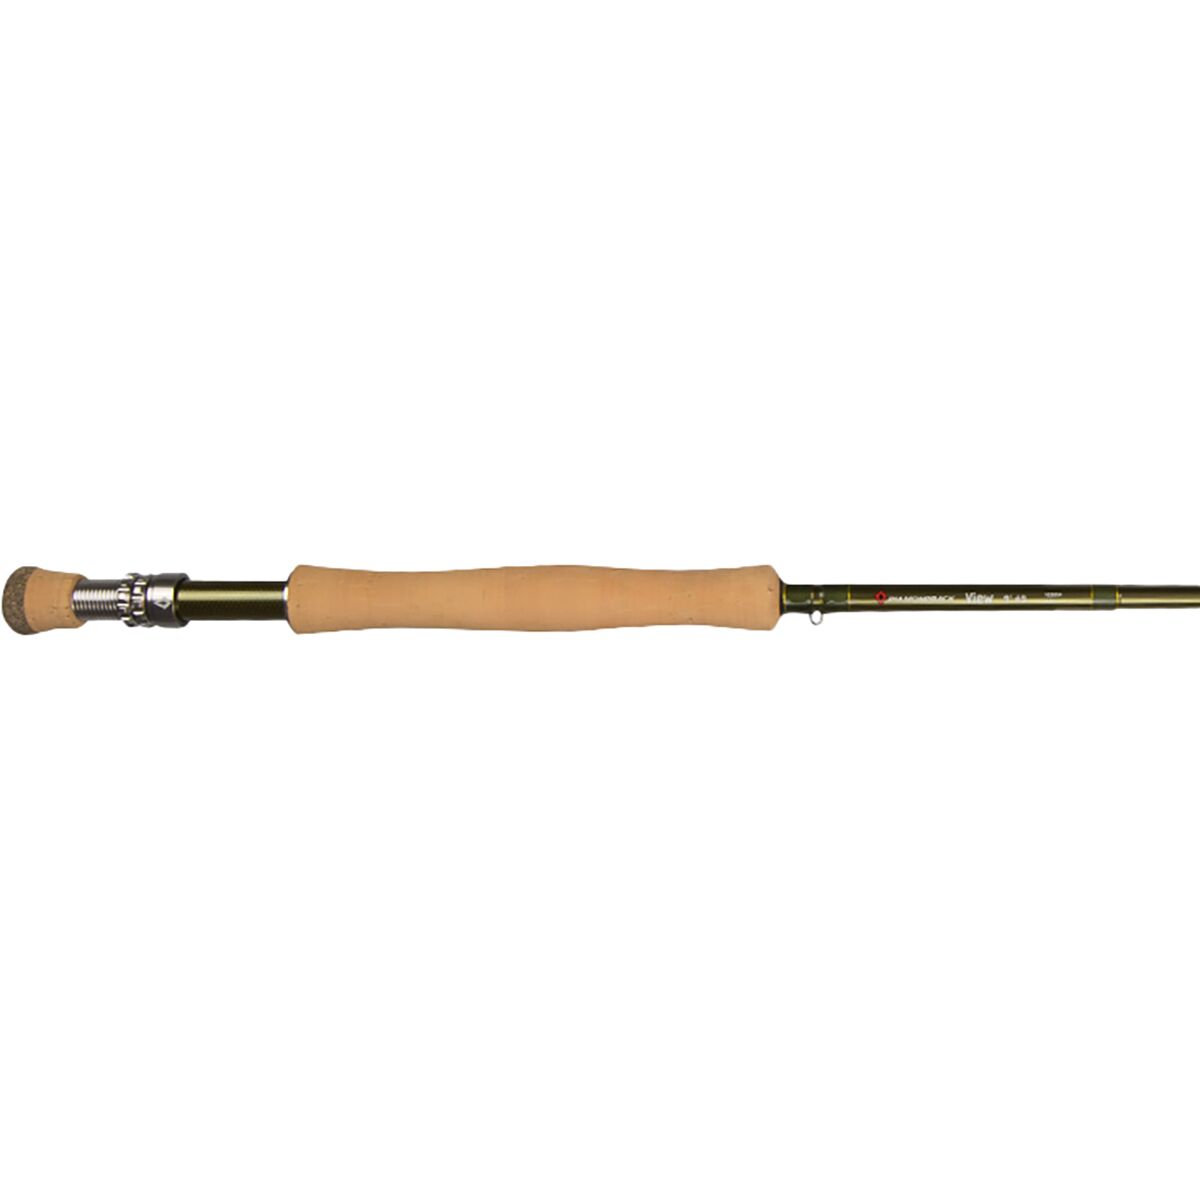 Diamondback View Fly Rod One Color 9ft #7